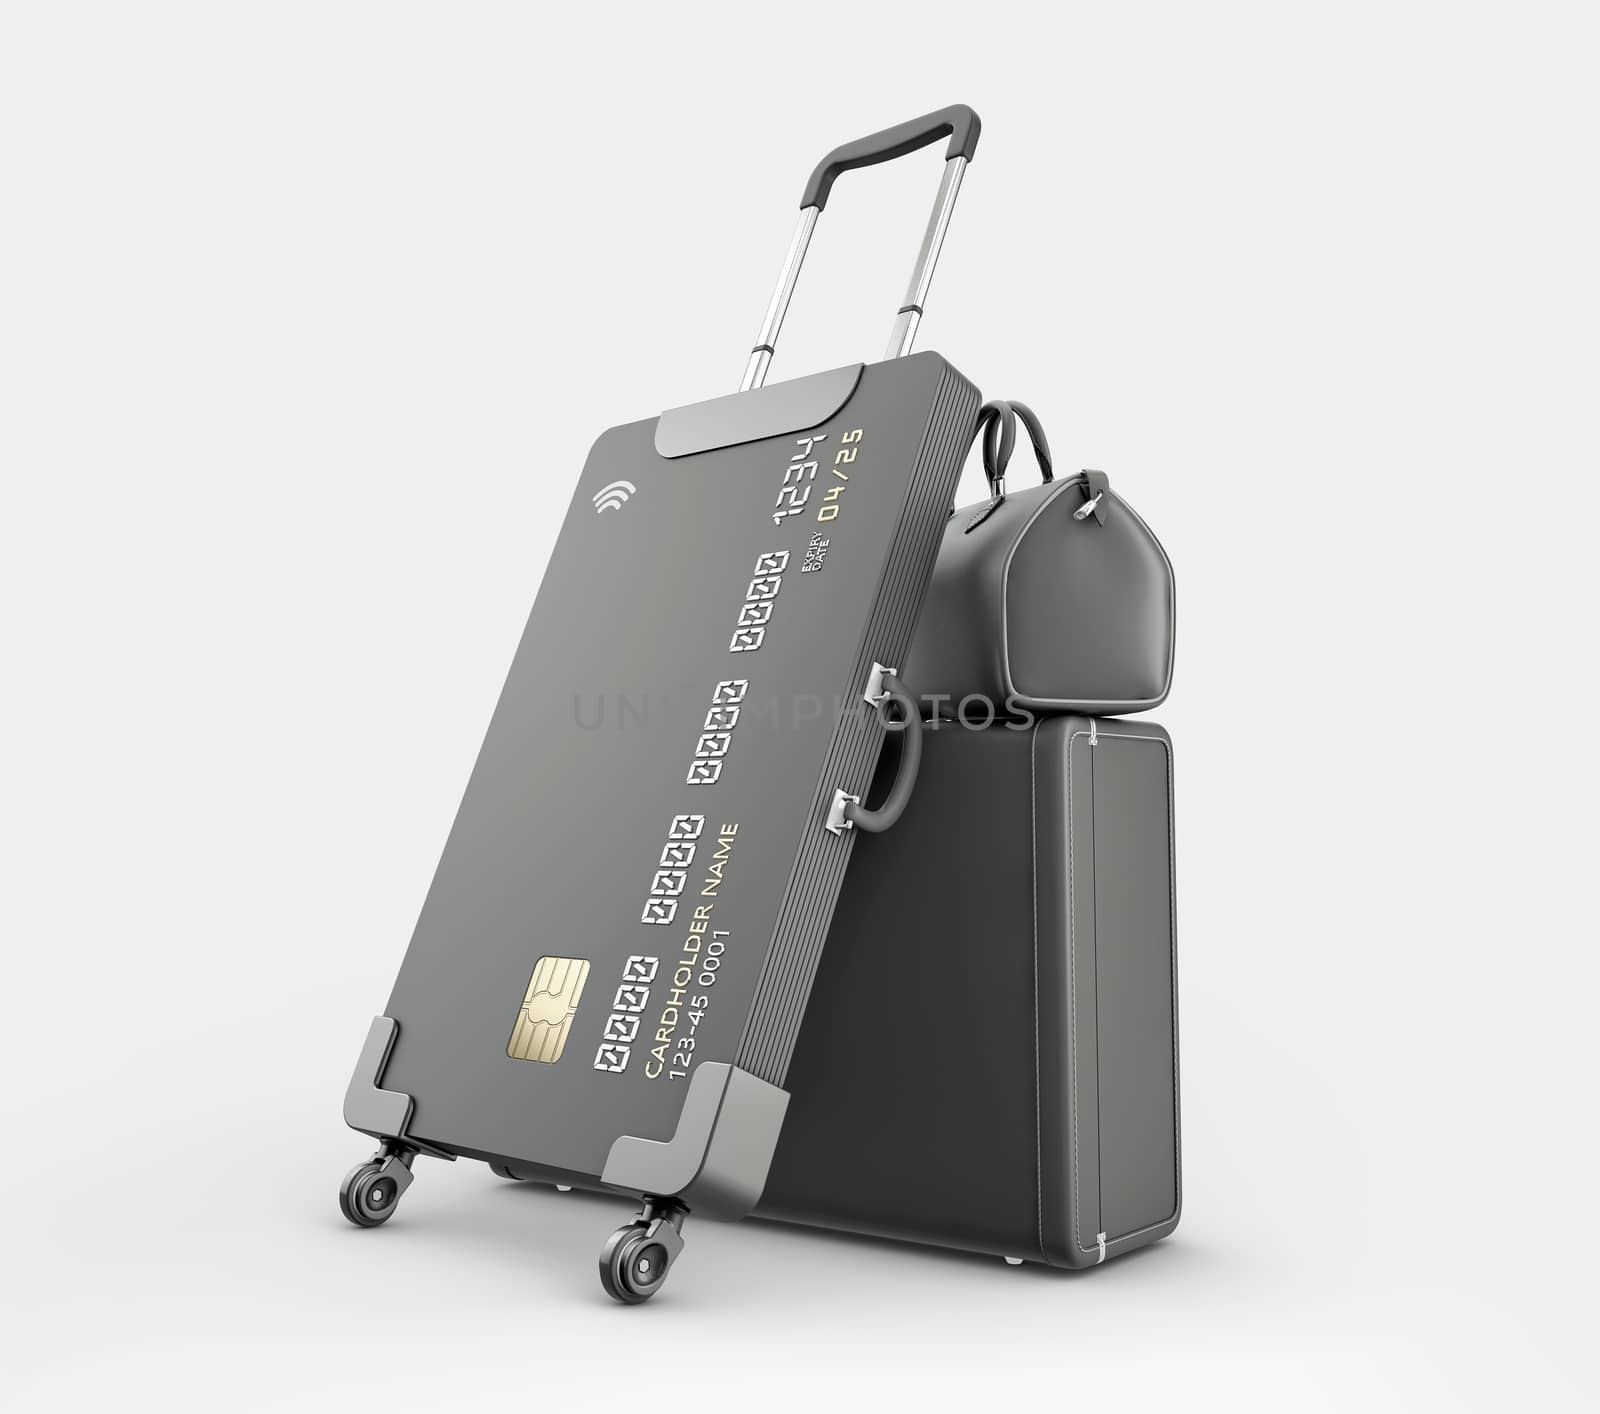 3d Rendering of Credit Card Suitcase with luggage include clipping path.